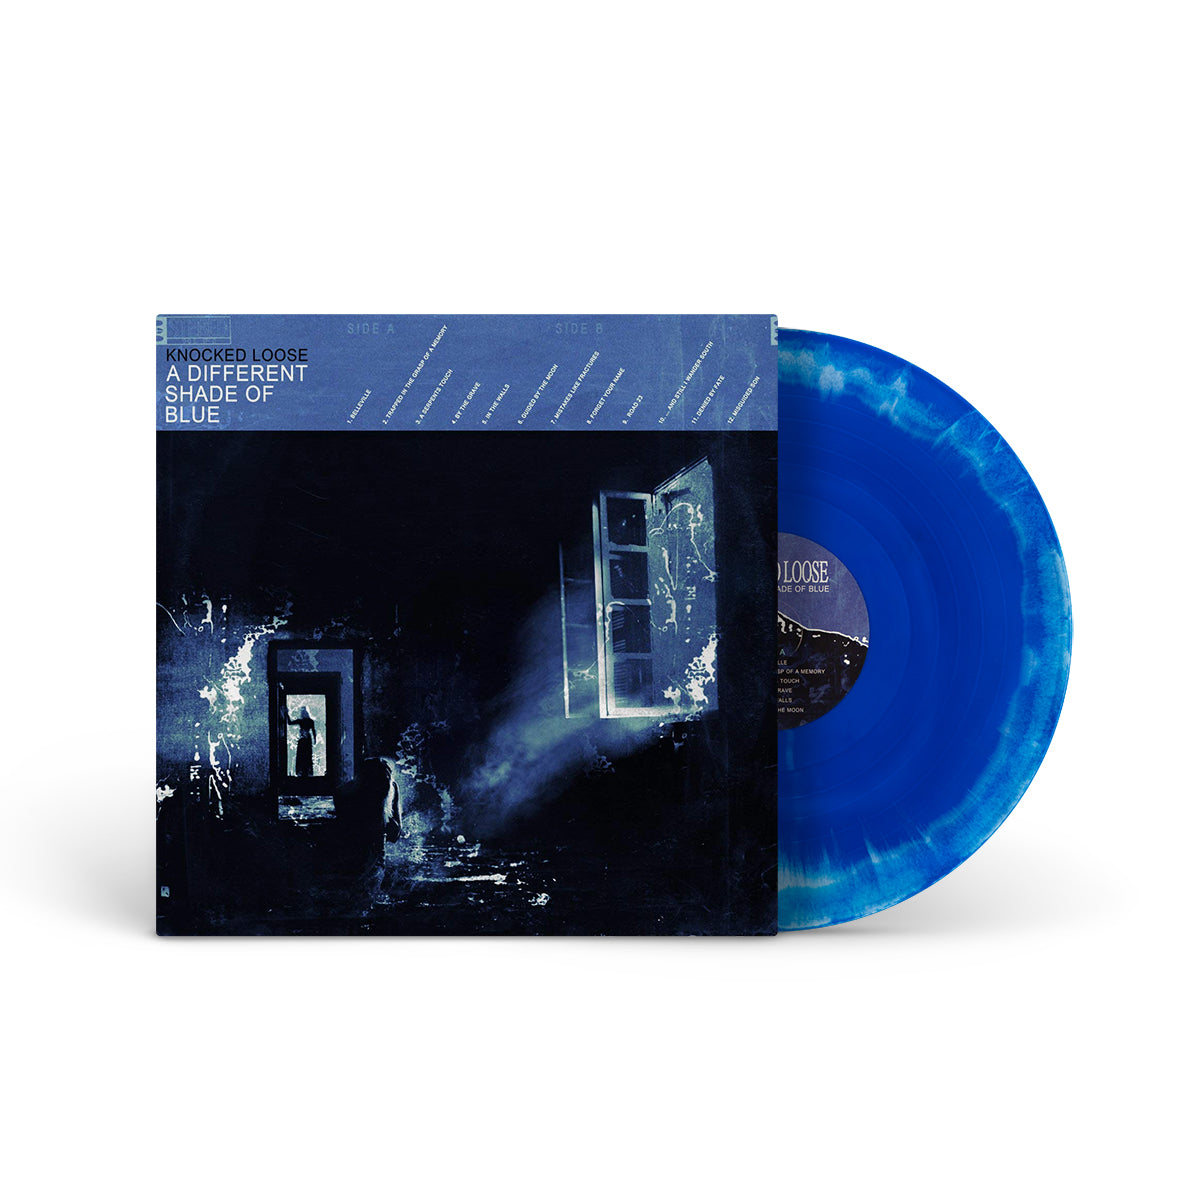 KNOCKED LOOSE "A Different Shade Of Blue" LP